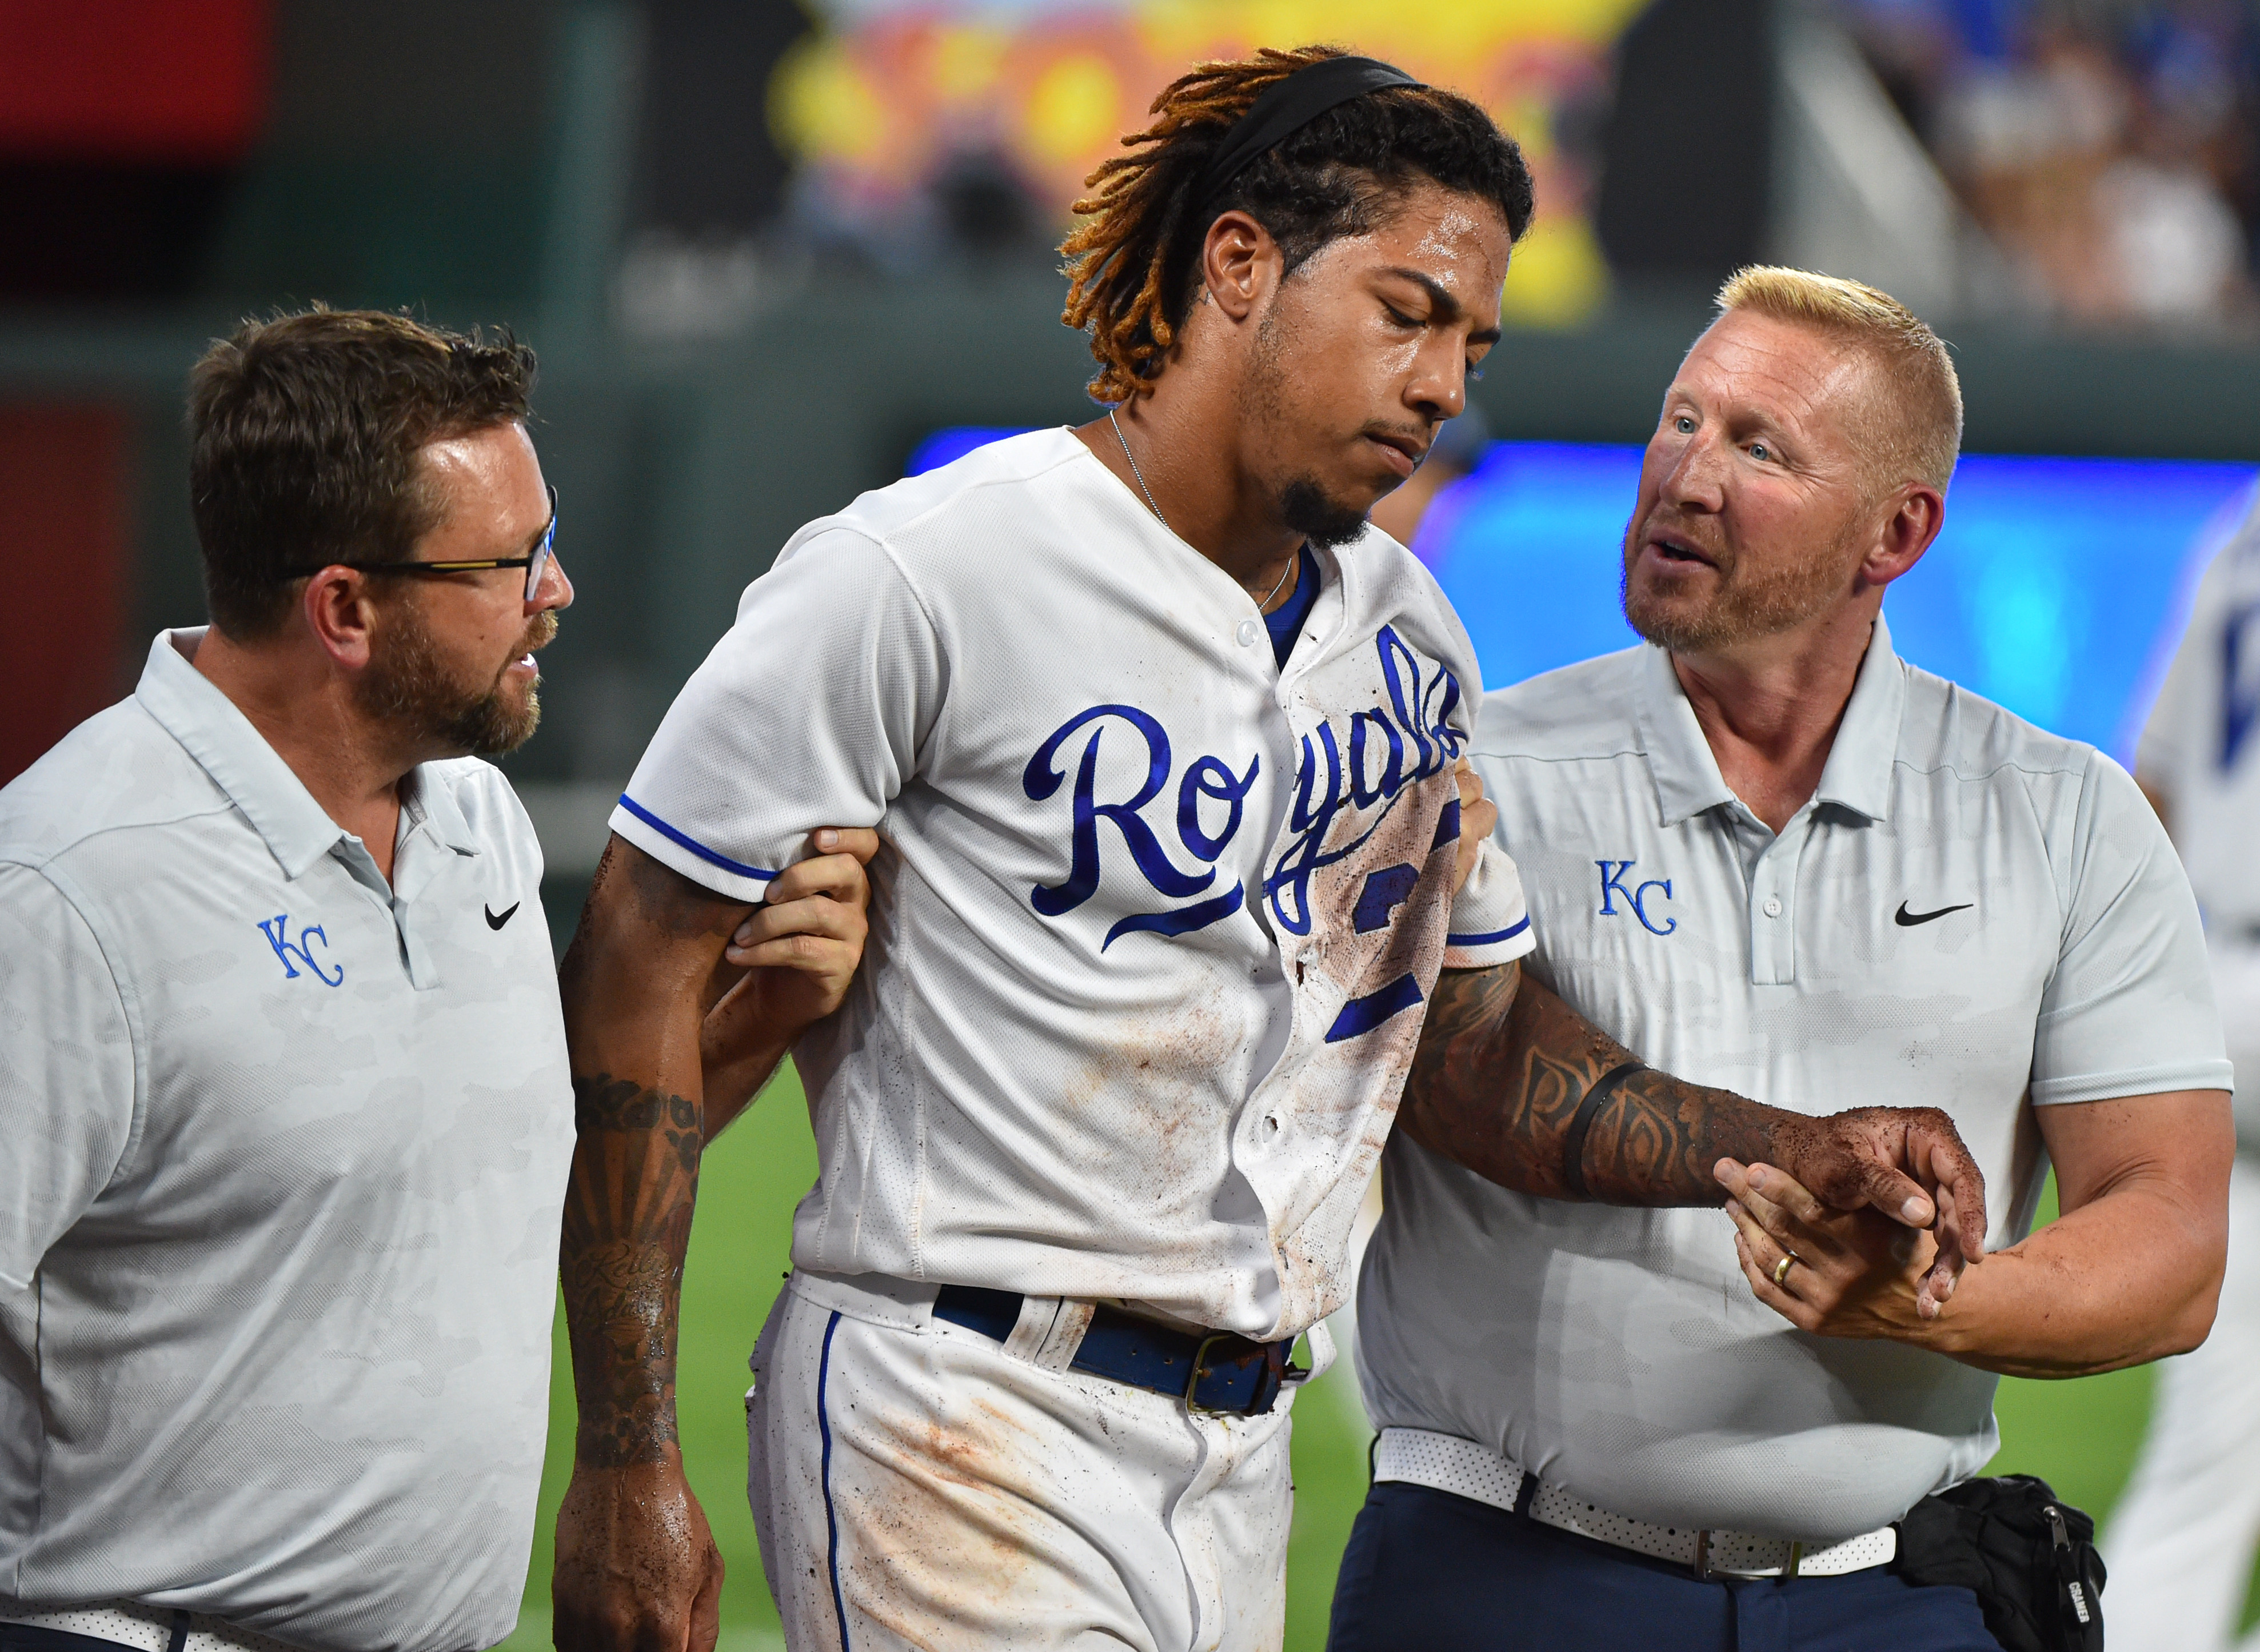 Adalberto Mondesi #27 of the Kansas City Royals is helped off the field by a team trainers after he was injured while trying to catch a foul ball hit by Yolmer Sanchez #5 of the Chicago White Sox in the fifth inning at Kauffman Stadium on July 16, 2019 in